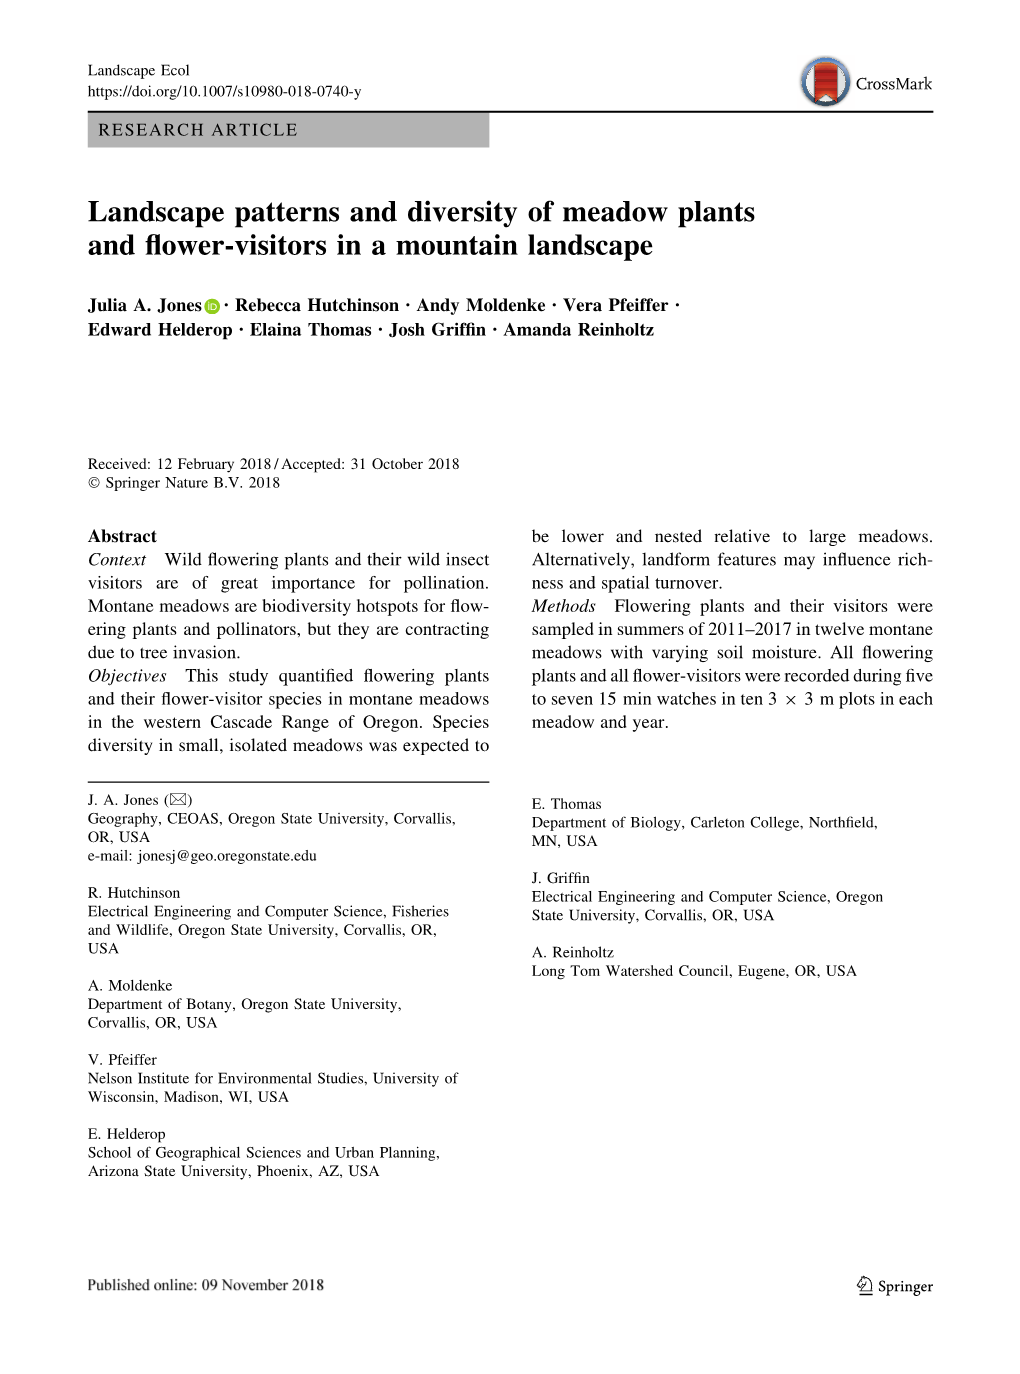 Landscape Patterns and Diversity of Meadow Plants and Flower-Visitors